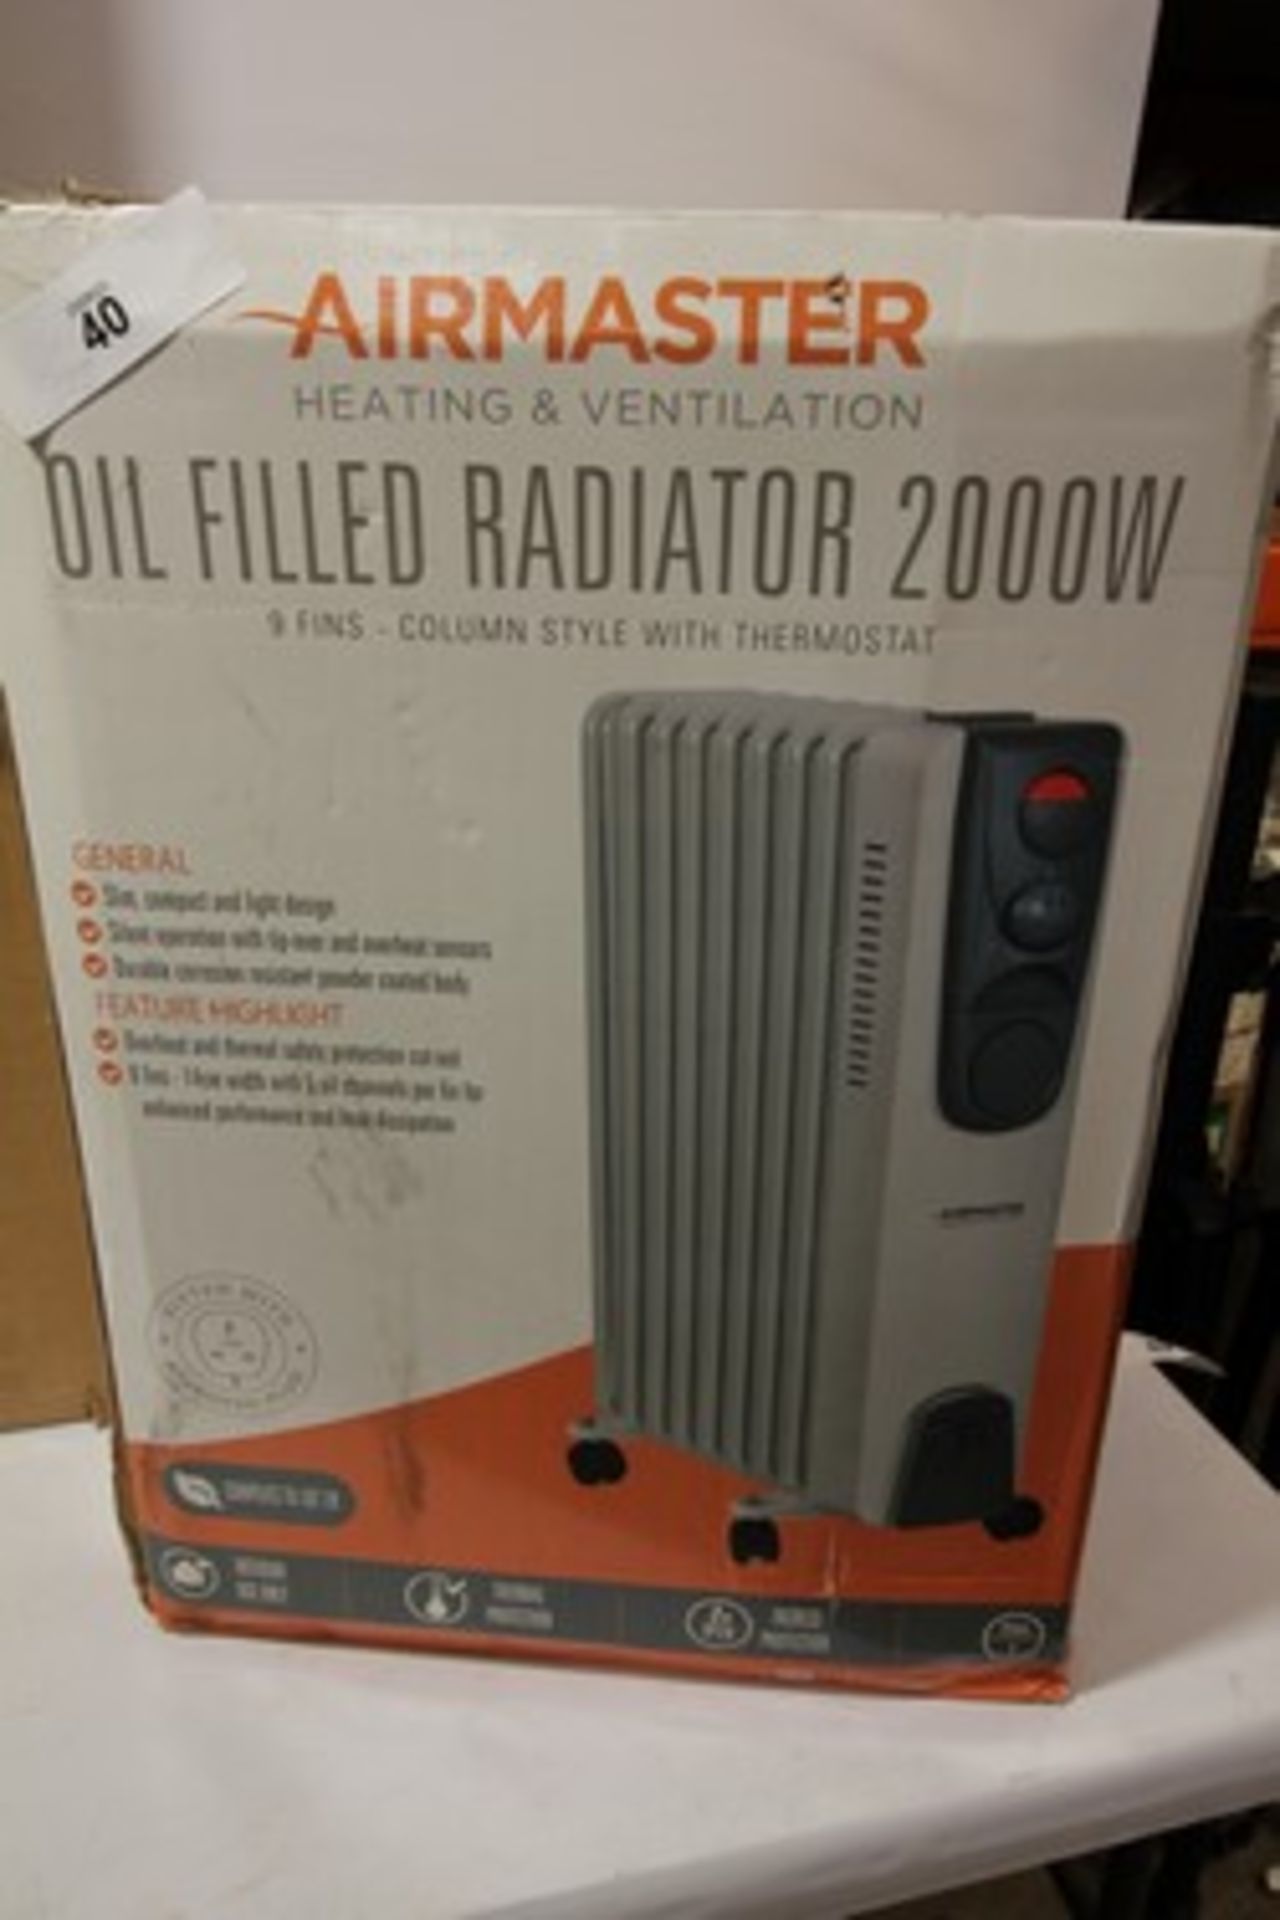 3 x heaters including 1 x Air Master 2000w oil radiator and 1 x Creda 2000w panel heater etc. - - Image 2 of 4